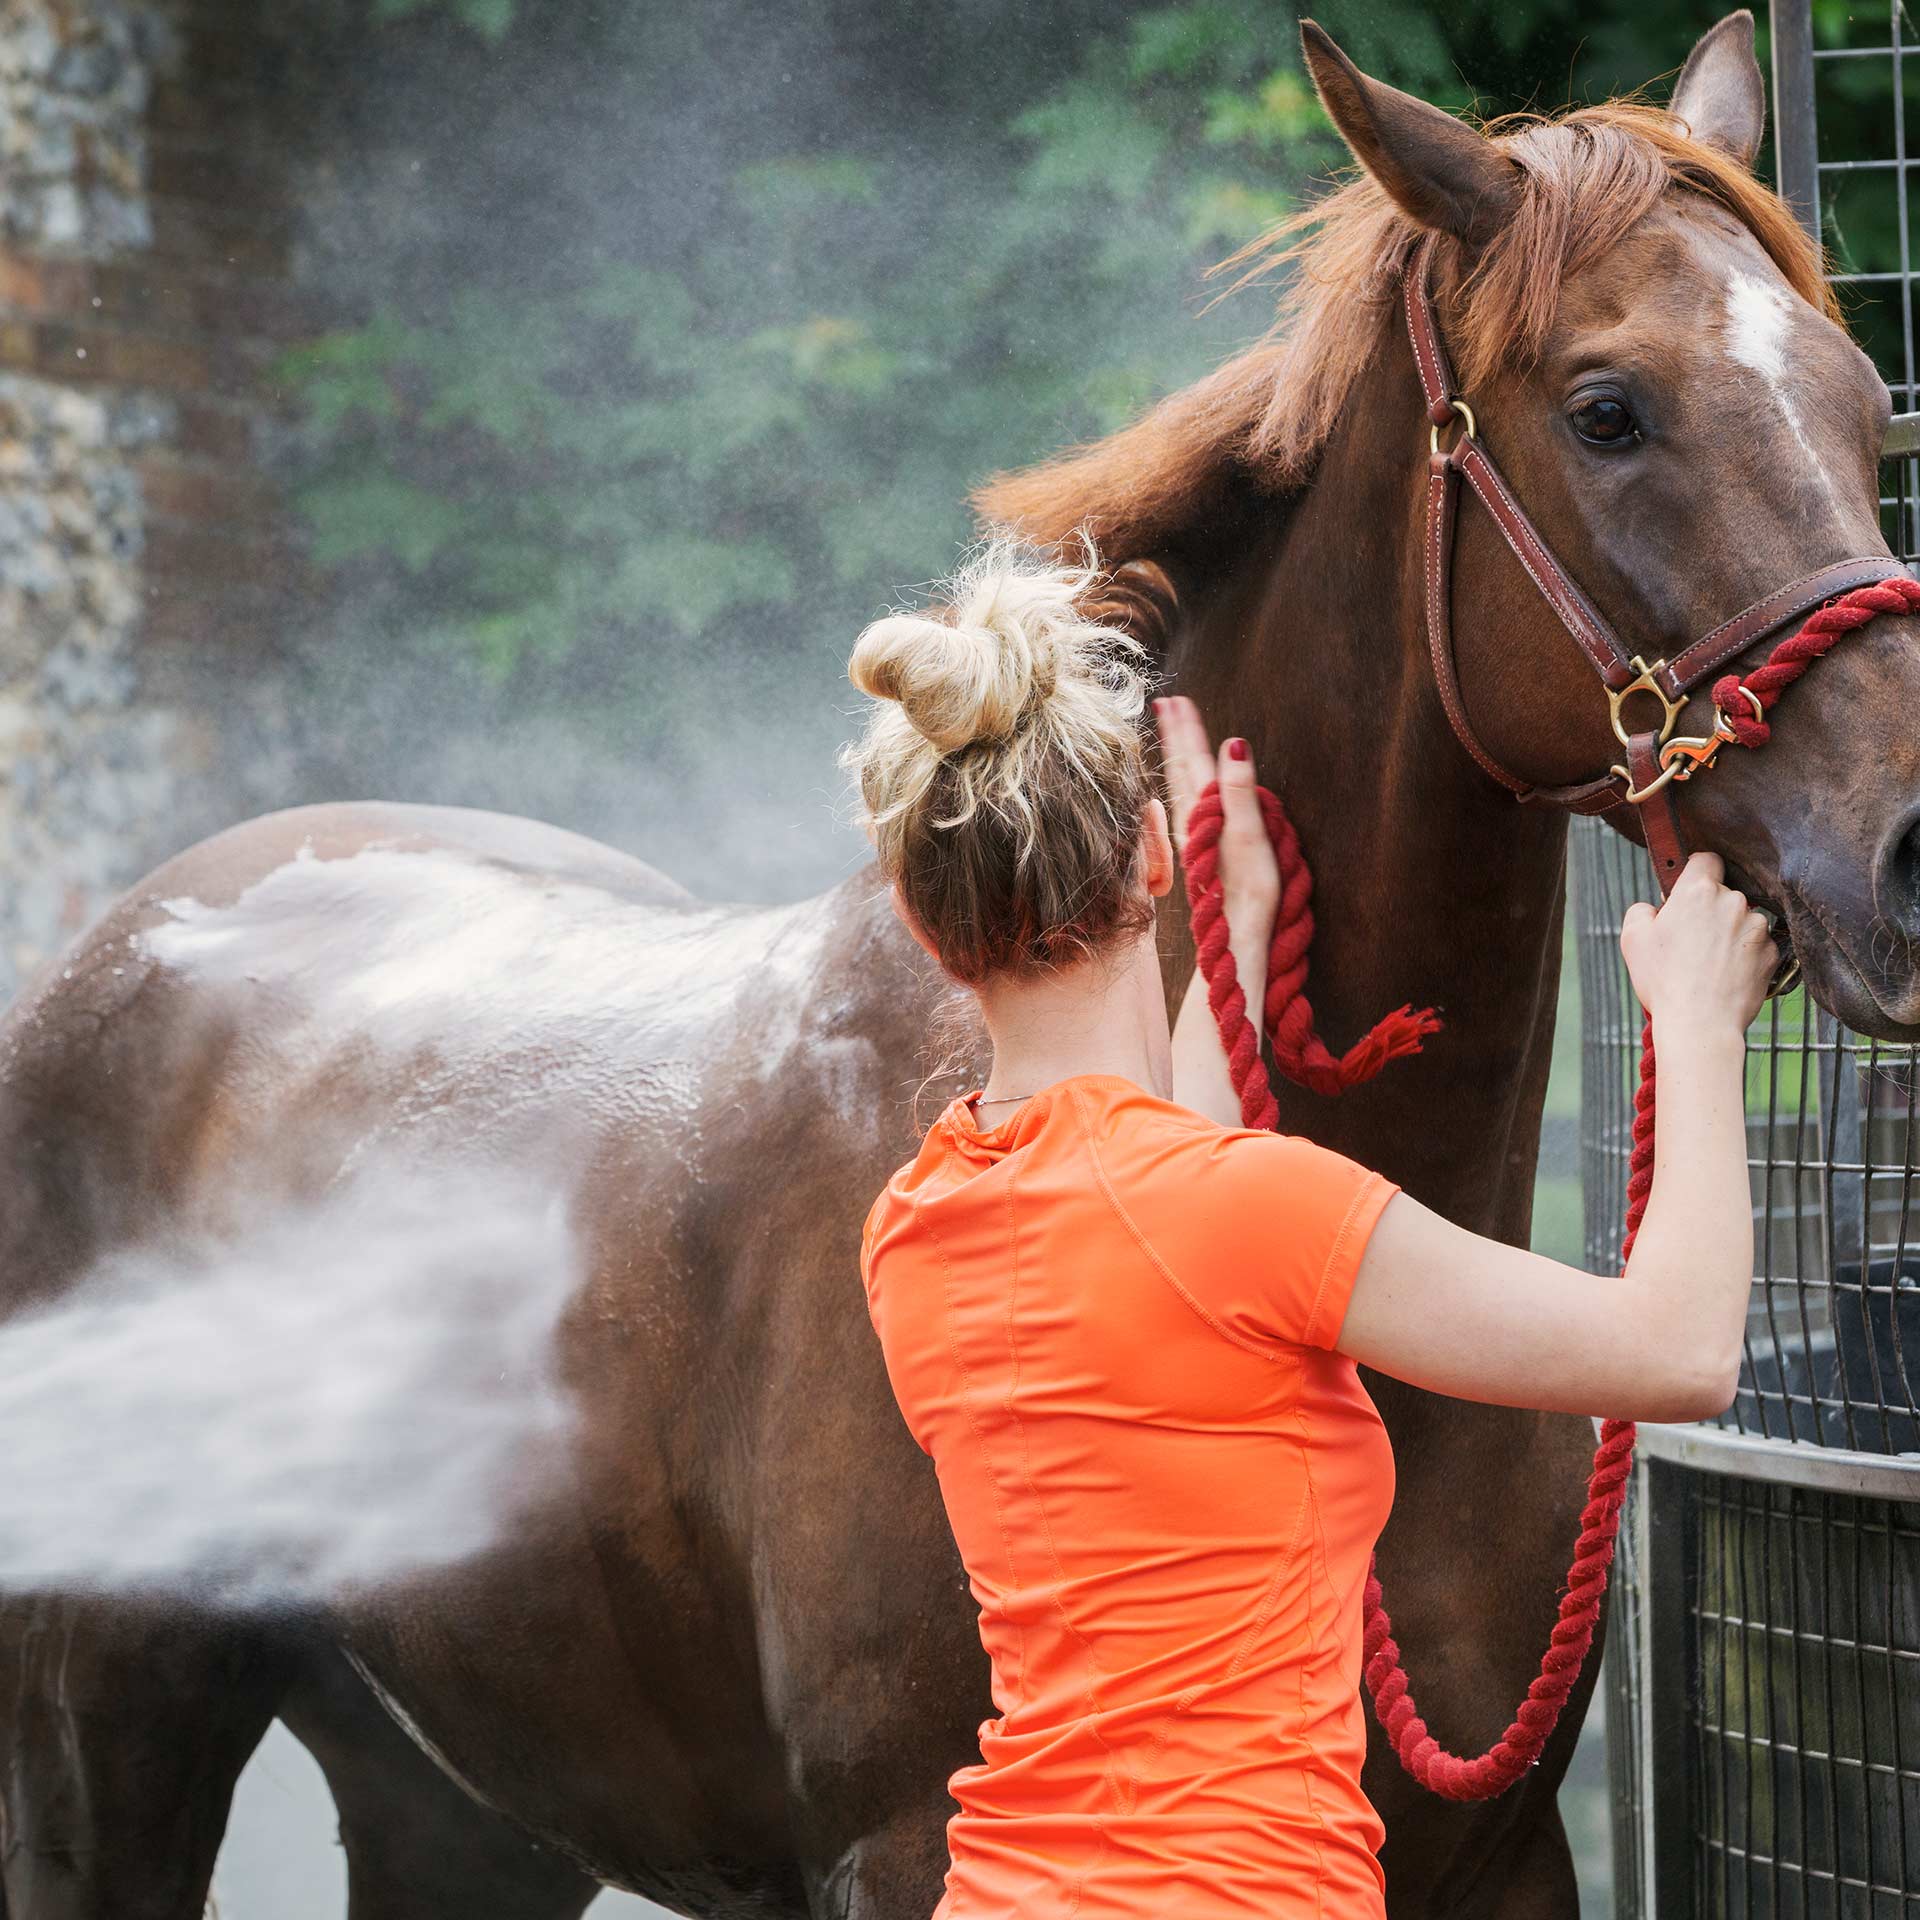 Probiotic Product Improves Horse's Atopic Feather Mite Allergy